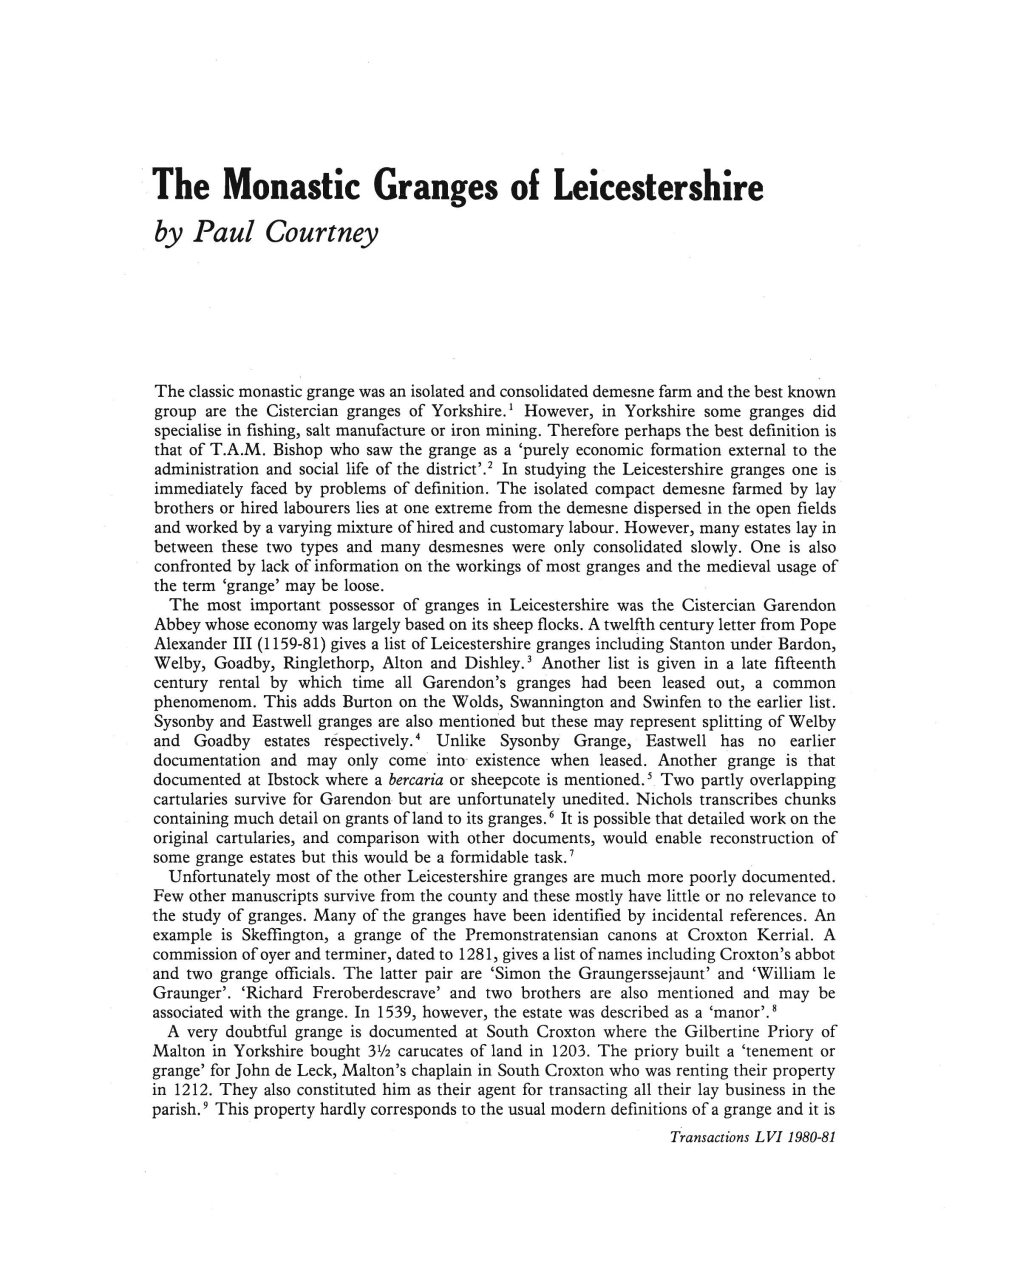 The Monastic Granges of Leicestershire by Paul Courtney